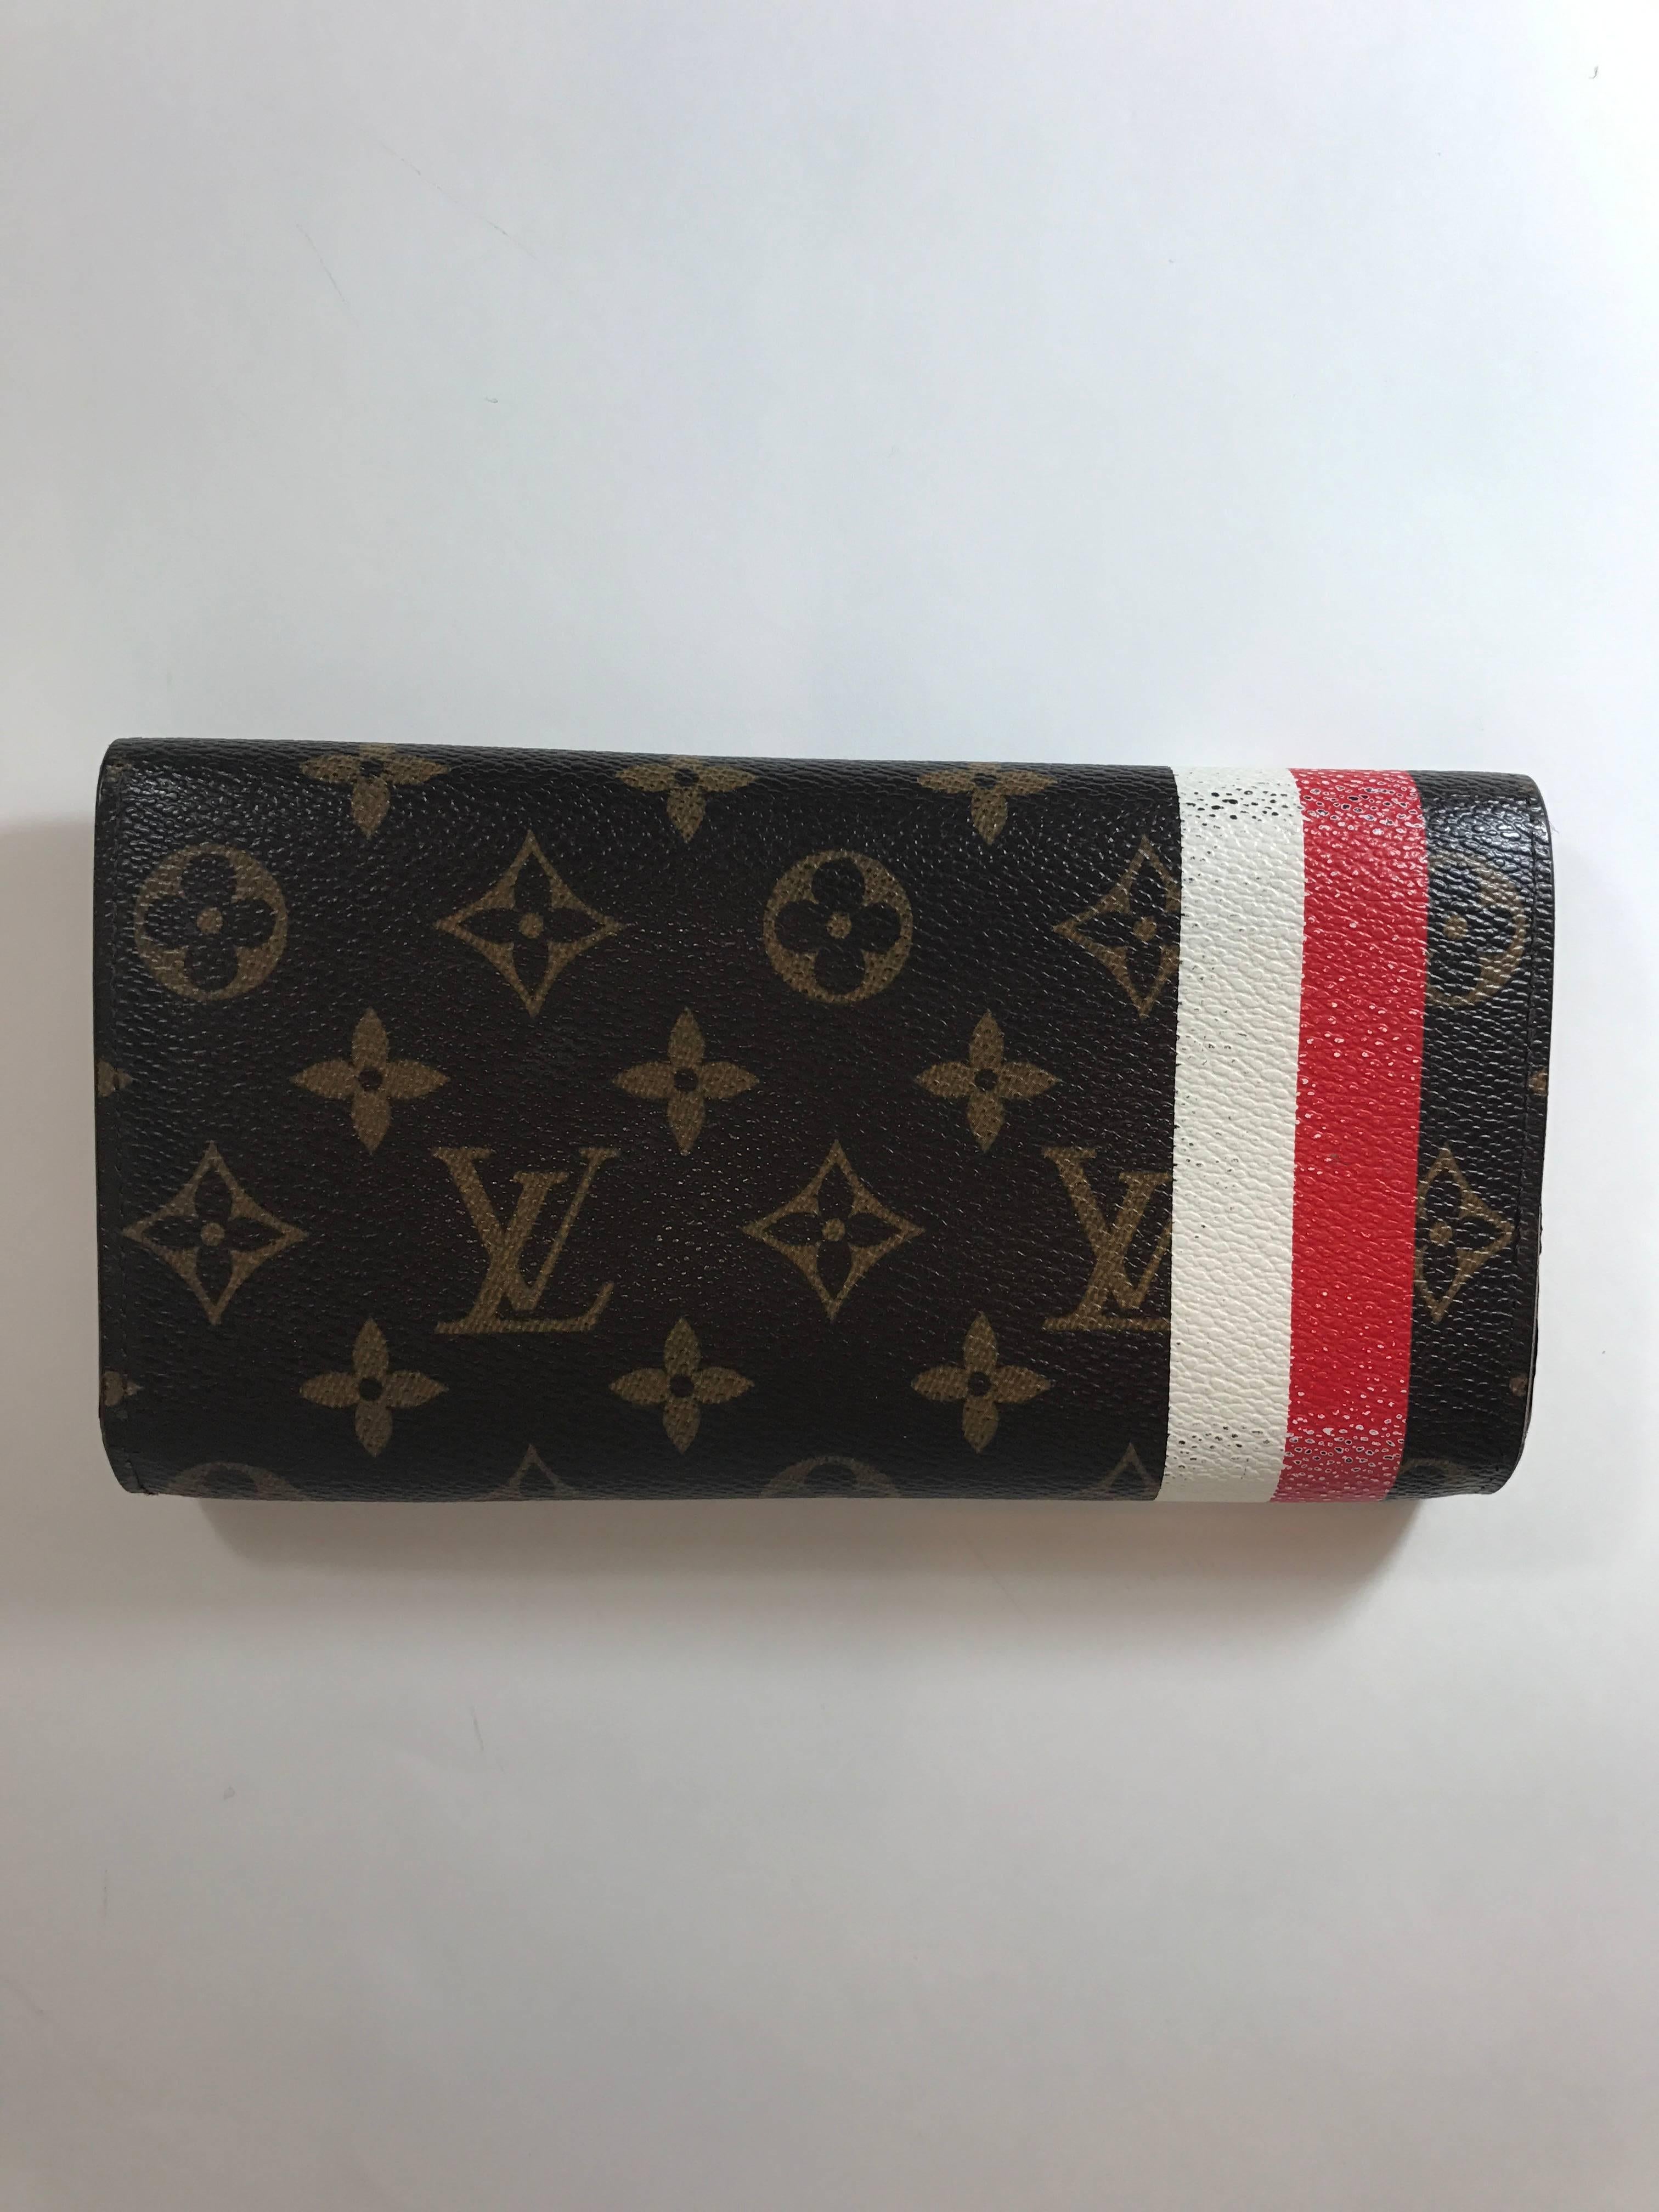 Louis Vuitton Red Monogram Groom Porte Monnaie Wallet featuring red and white stripes with the iconic Groom figure. 
Red Monogram Groom coated canvas
Made in France
Date/Authenticity Code: CT0075
Goldtone Hardware.
Single snap closure opening and